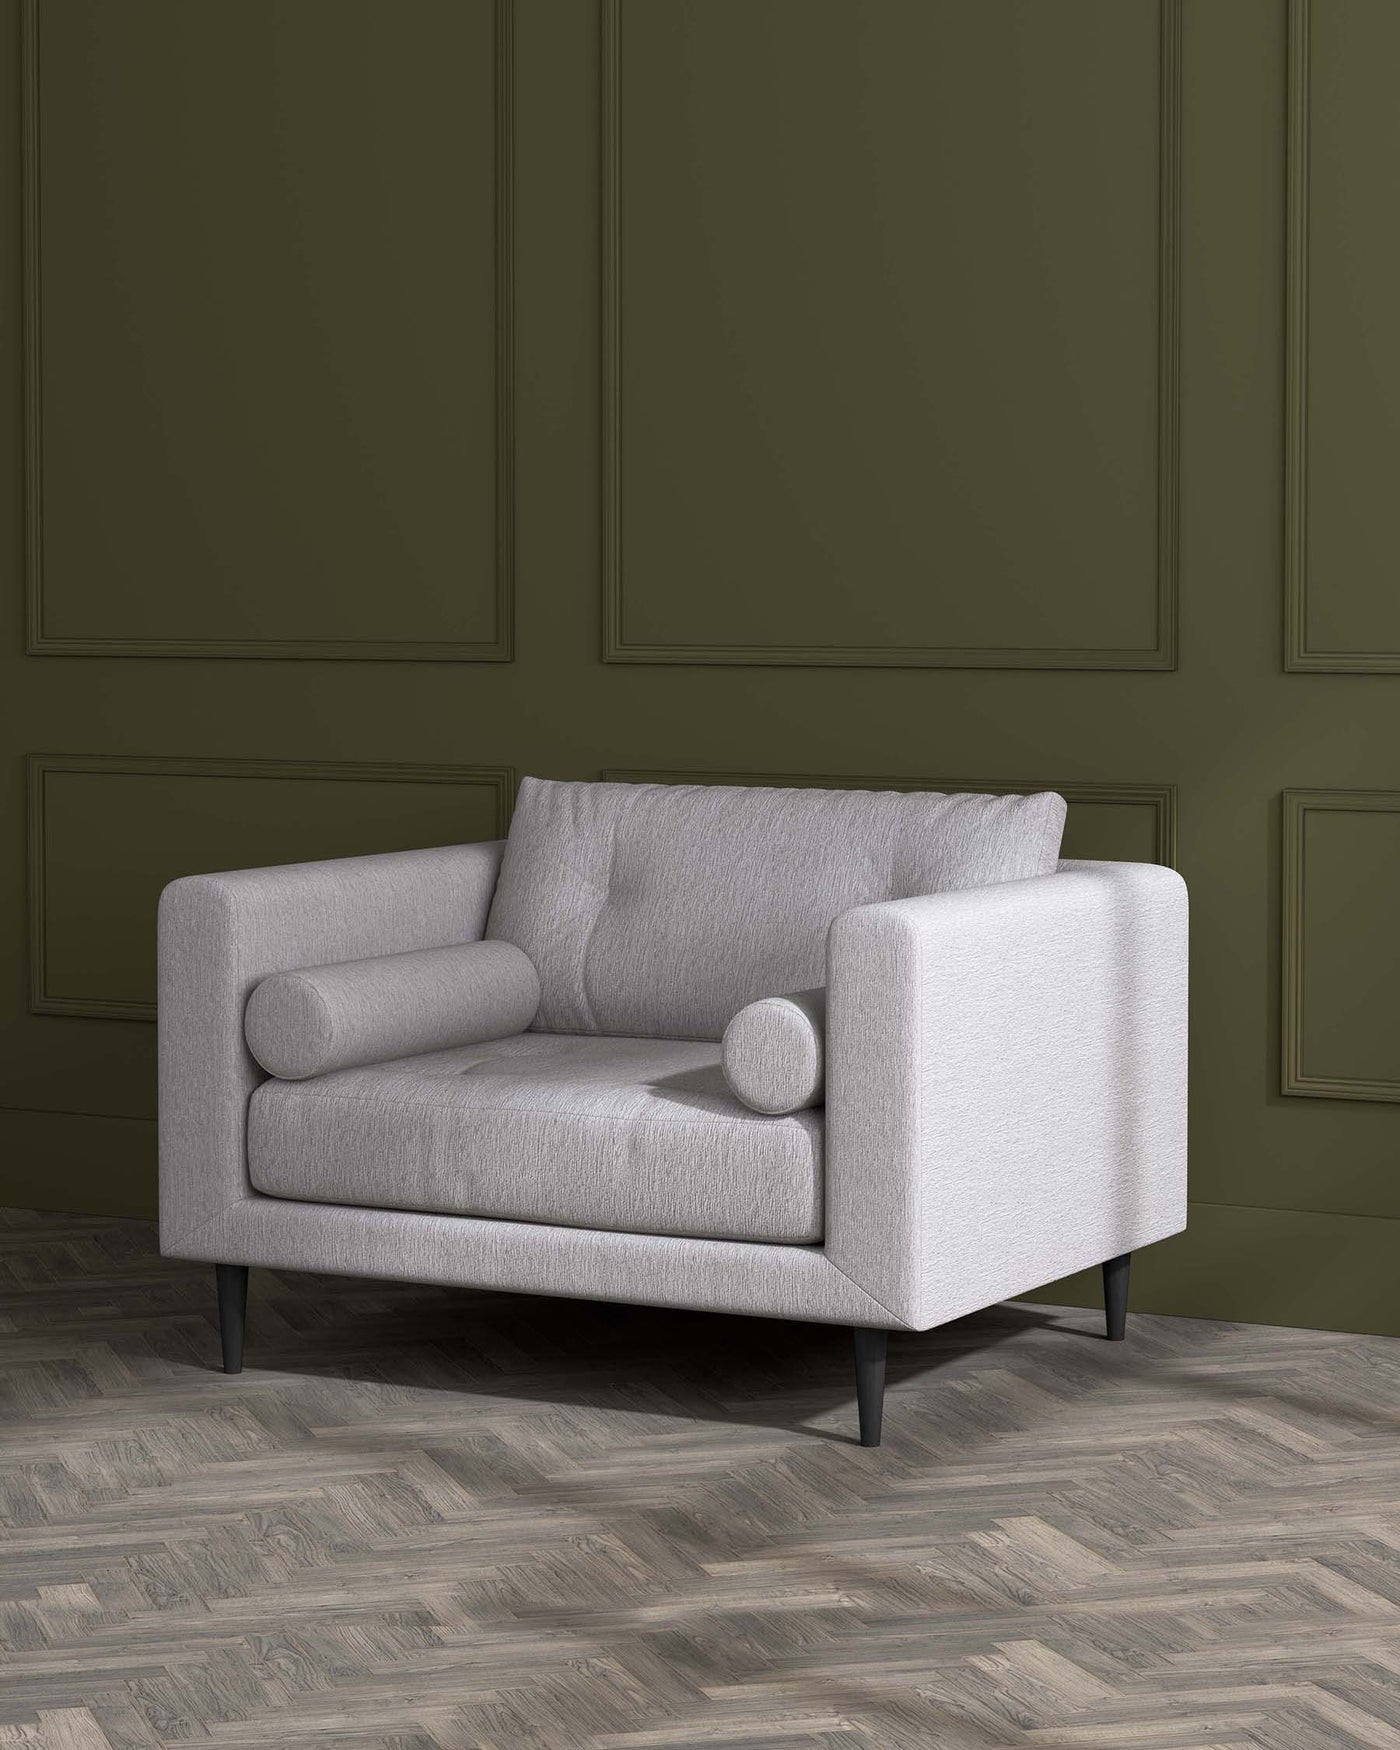 Modern minimalist light grey fabric loveseat with a clean-lined silhouette, featuring plush back and seat cushions, one cylindrical bolster pillow, flared armrests, and black tapered wooden legs. The sofa is showcased against a panelled olive green wall and a herringbone patterned wooden floor.